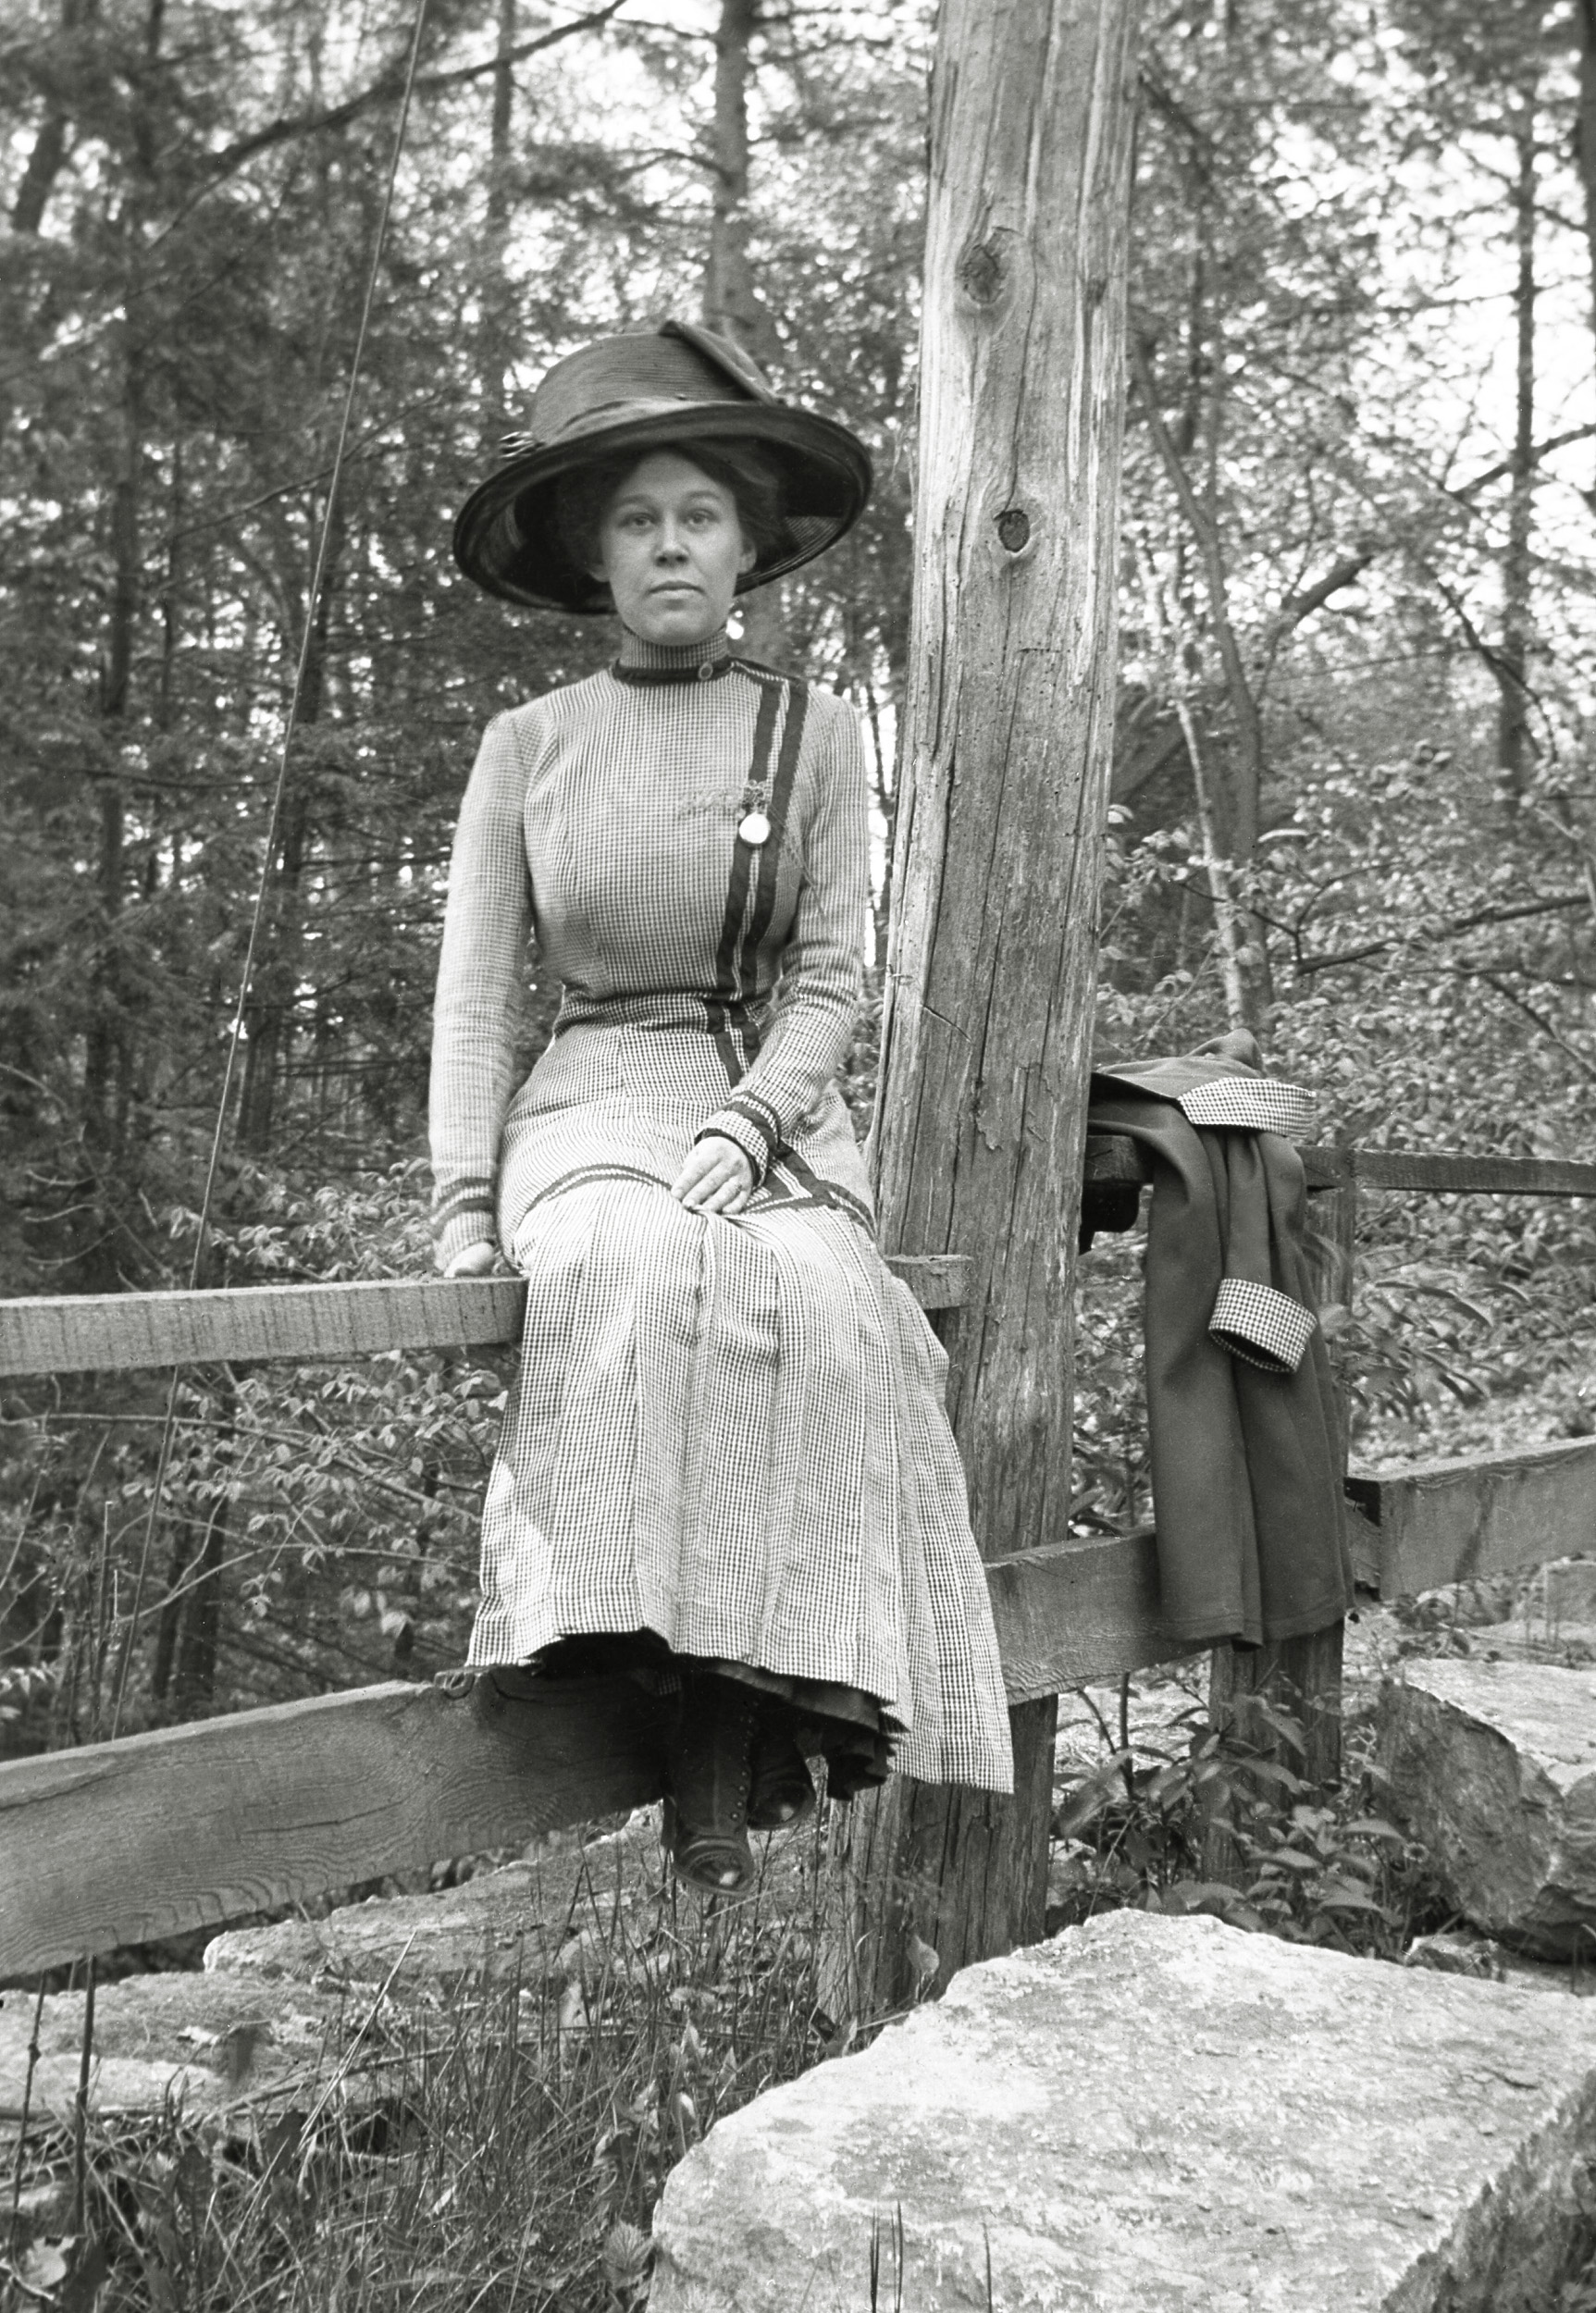 Our lovely lady from upstate New York once again, here wearing the most incredible hat. Another photo from the collection of circa 1912 negatives I recently purchased. View full size.